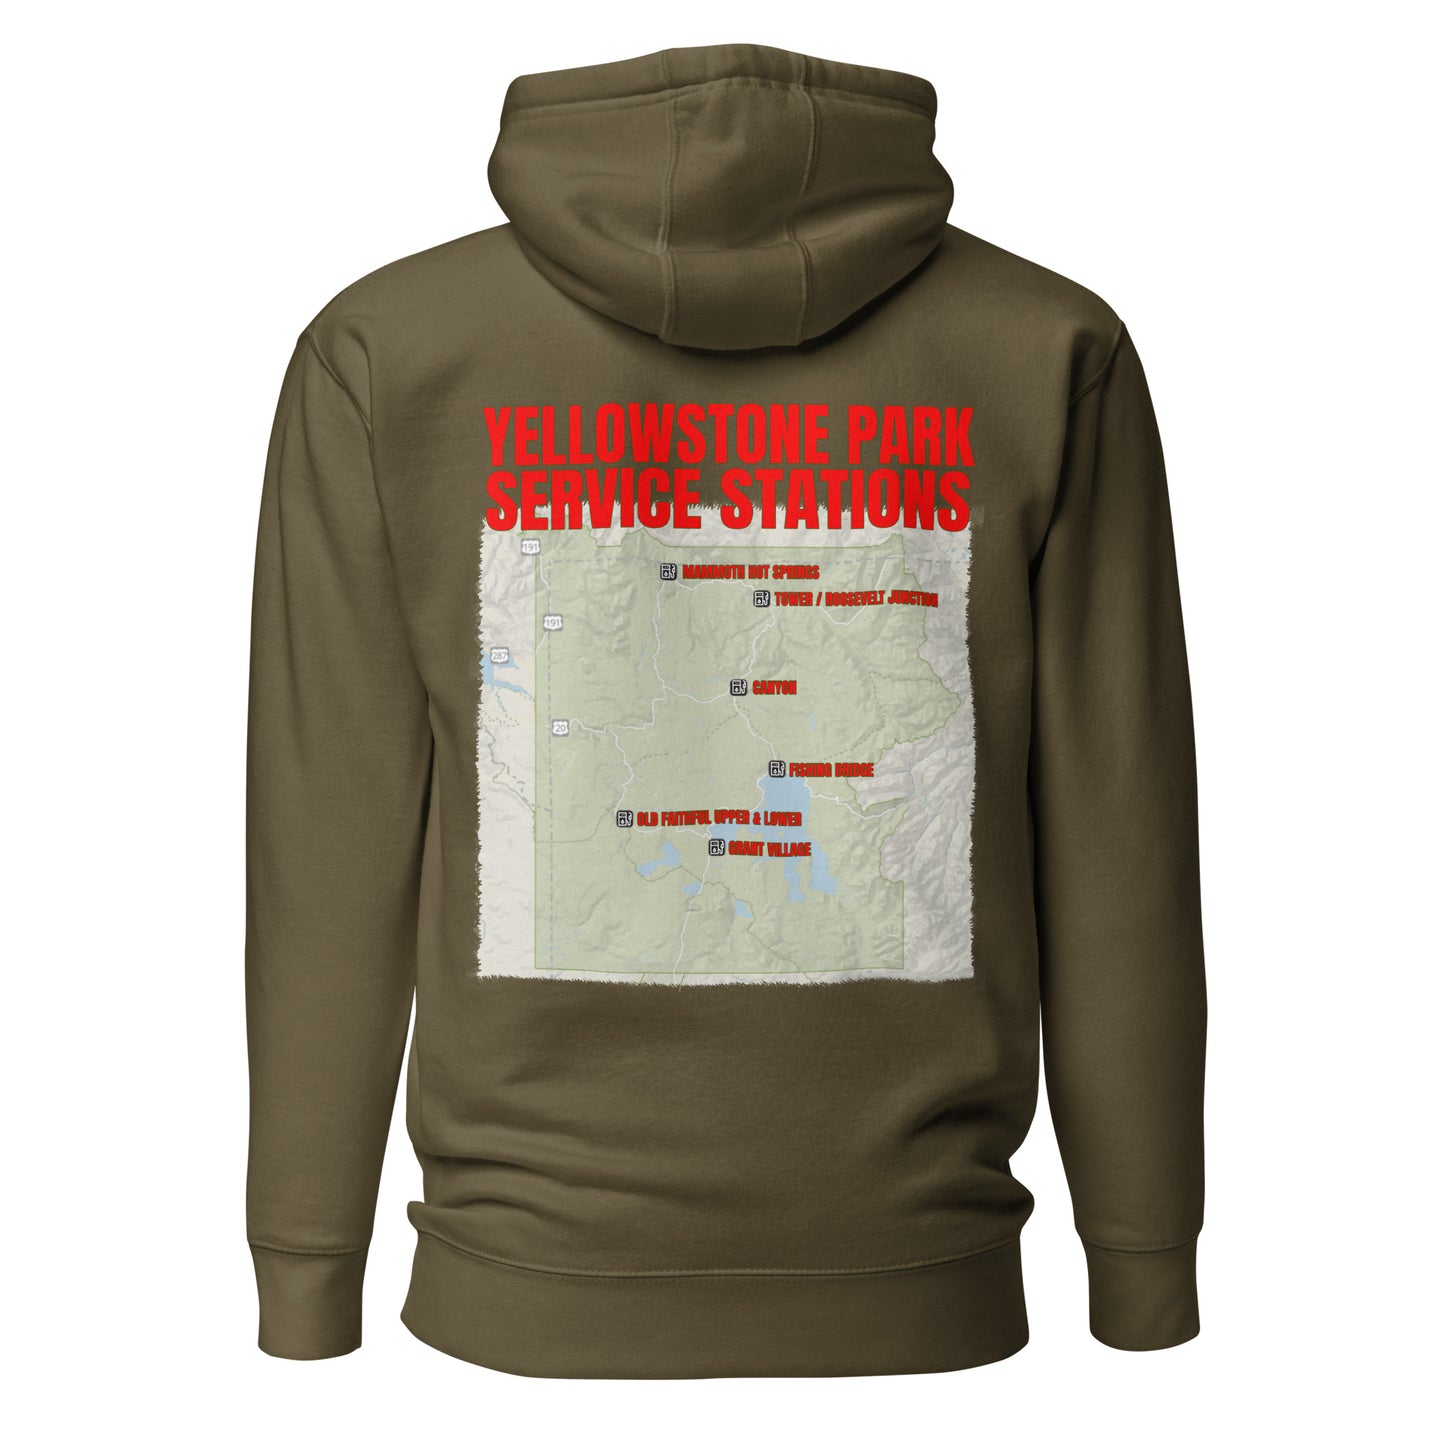 YPSS Yellowstone Park Service Stations Map Hoodie